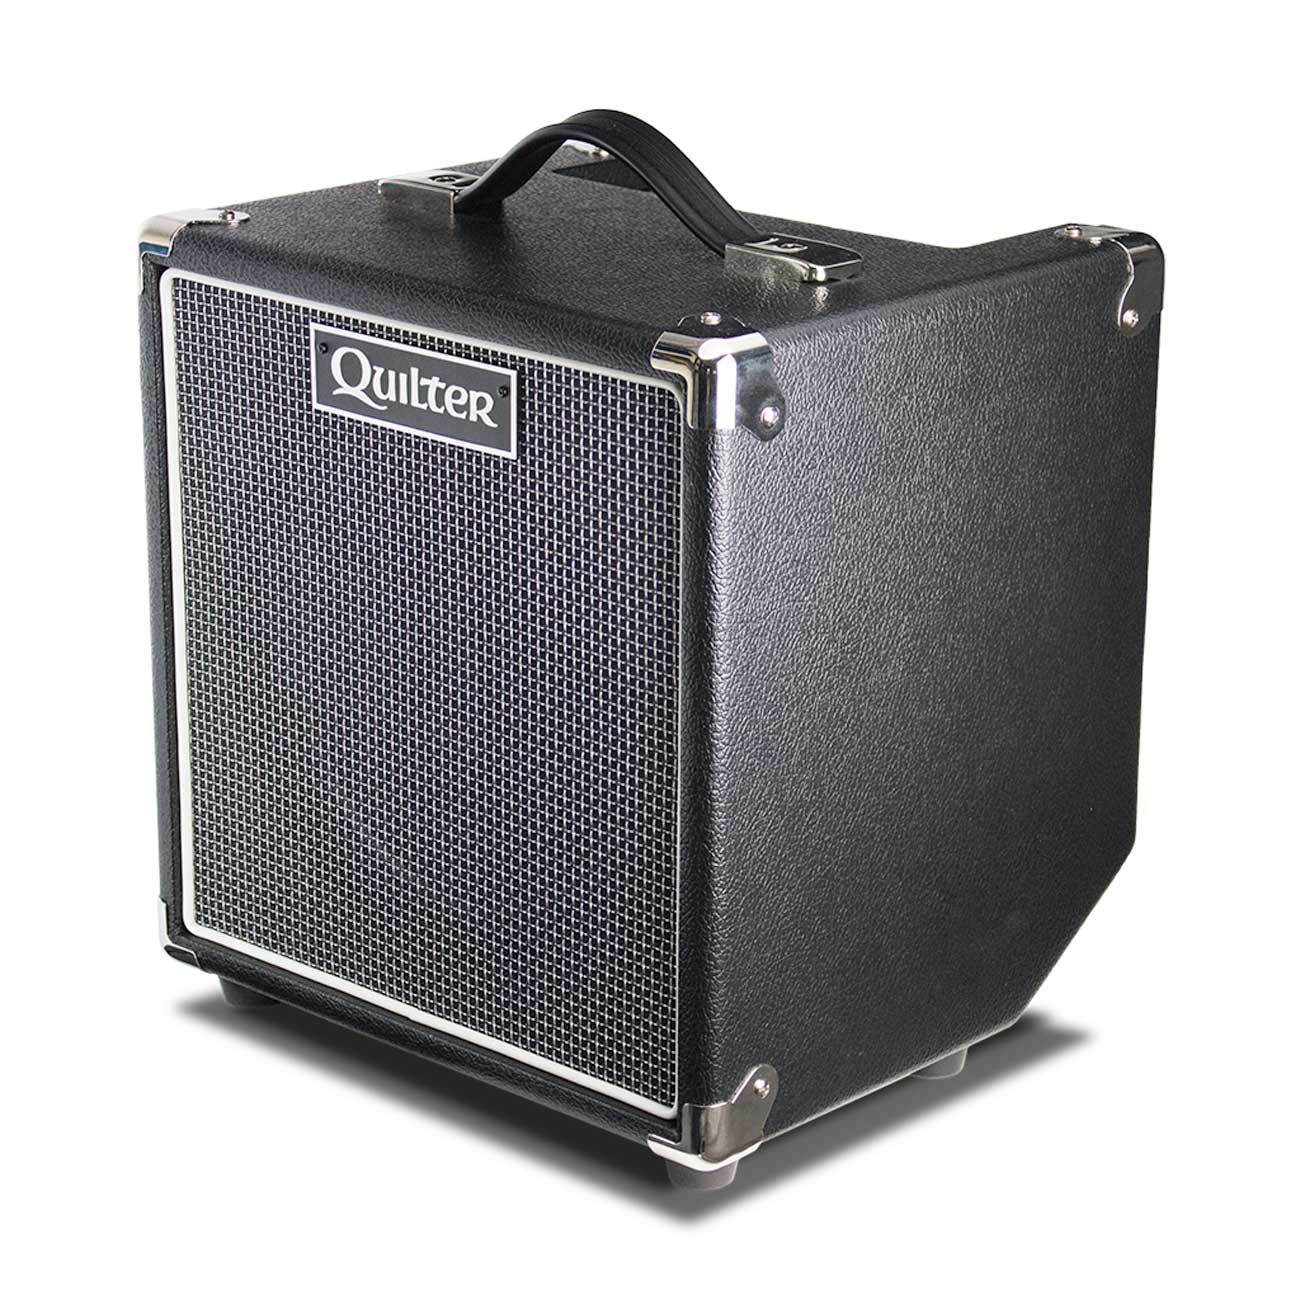 Quilter Amps Blockdock 10TC Compact 1x10” Lightweight Closed Back Cabinet